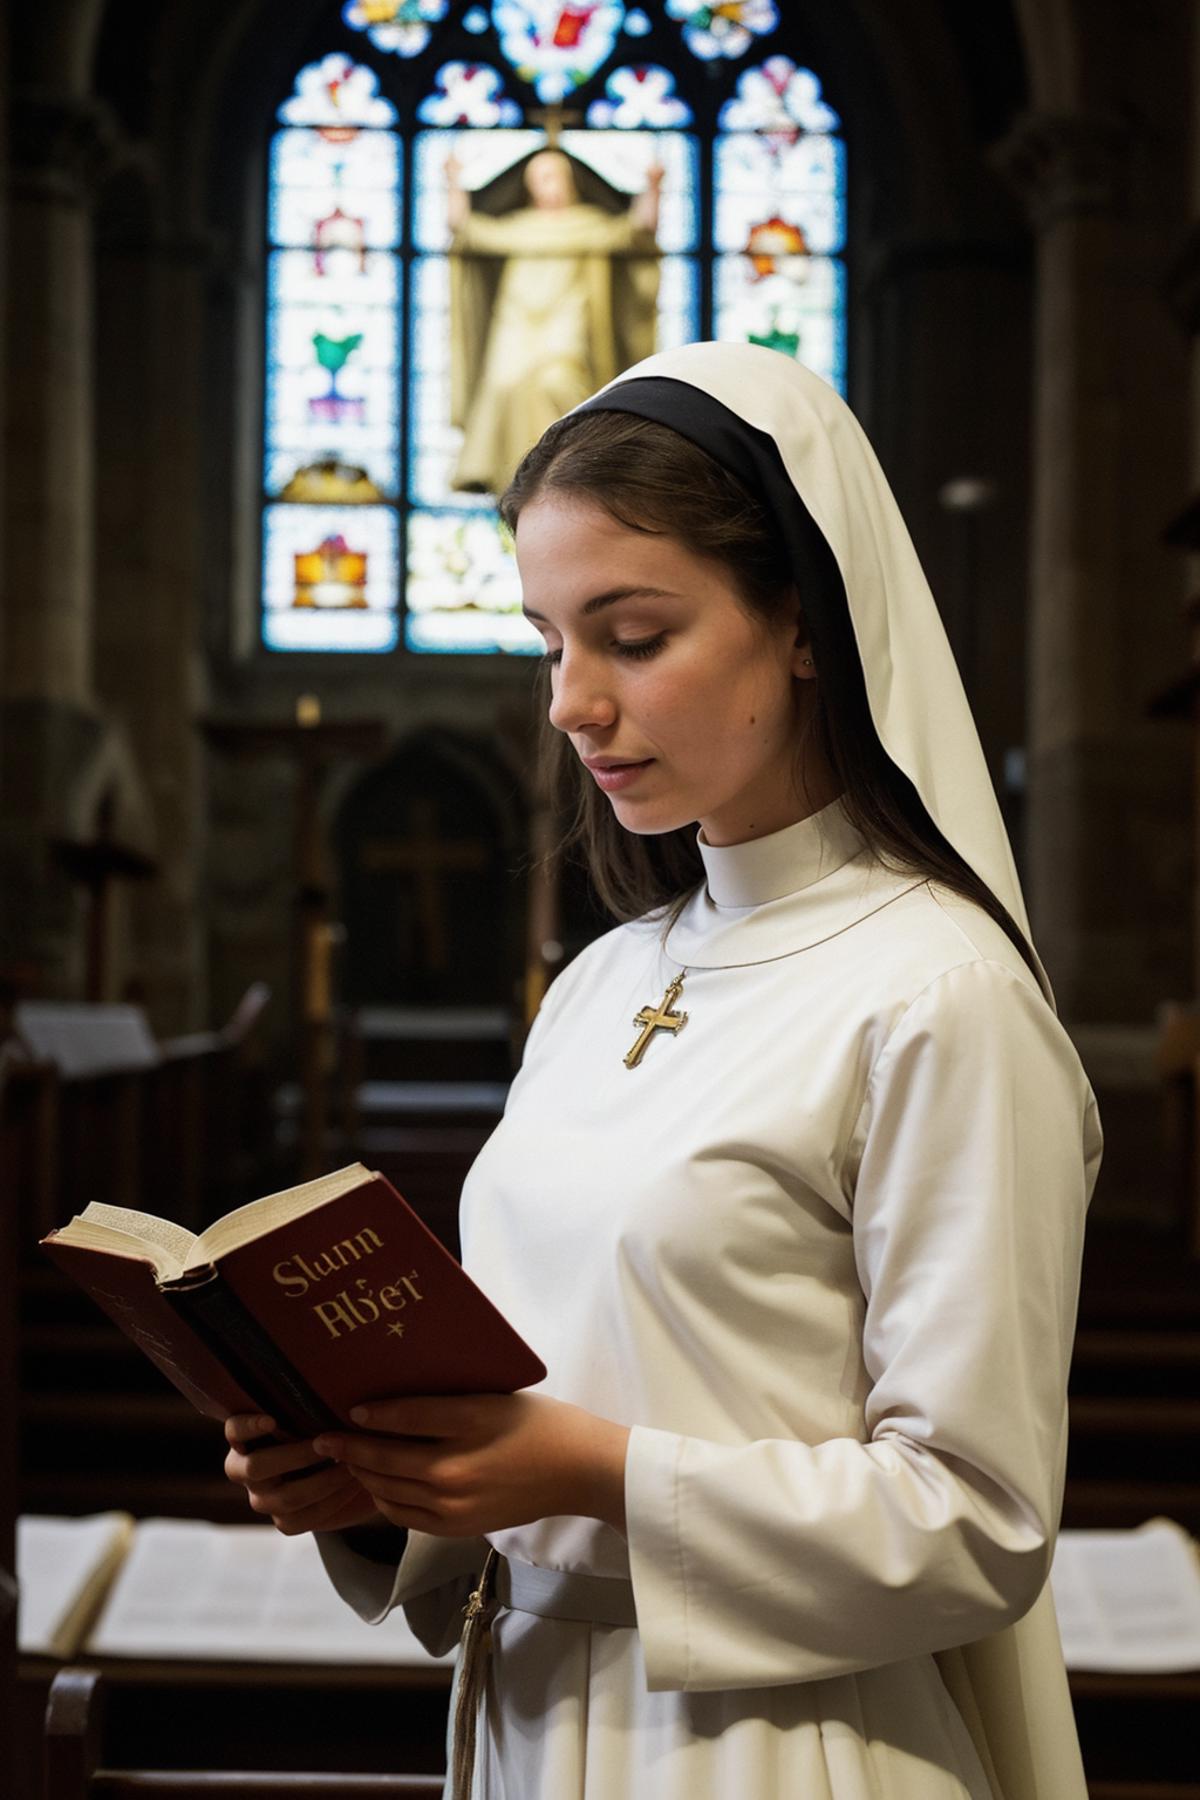 A woman in a nun's outfit reads a book in a church.